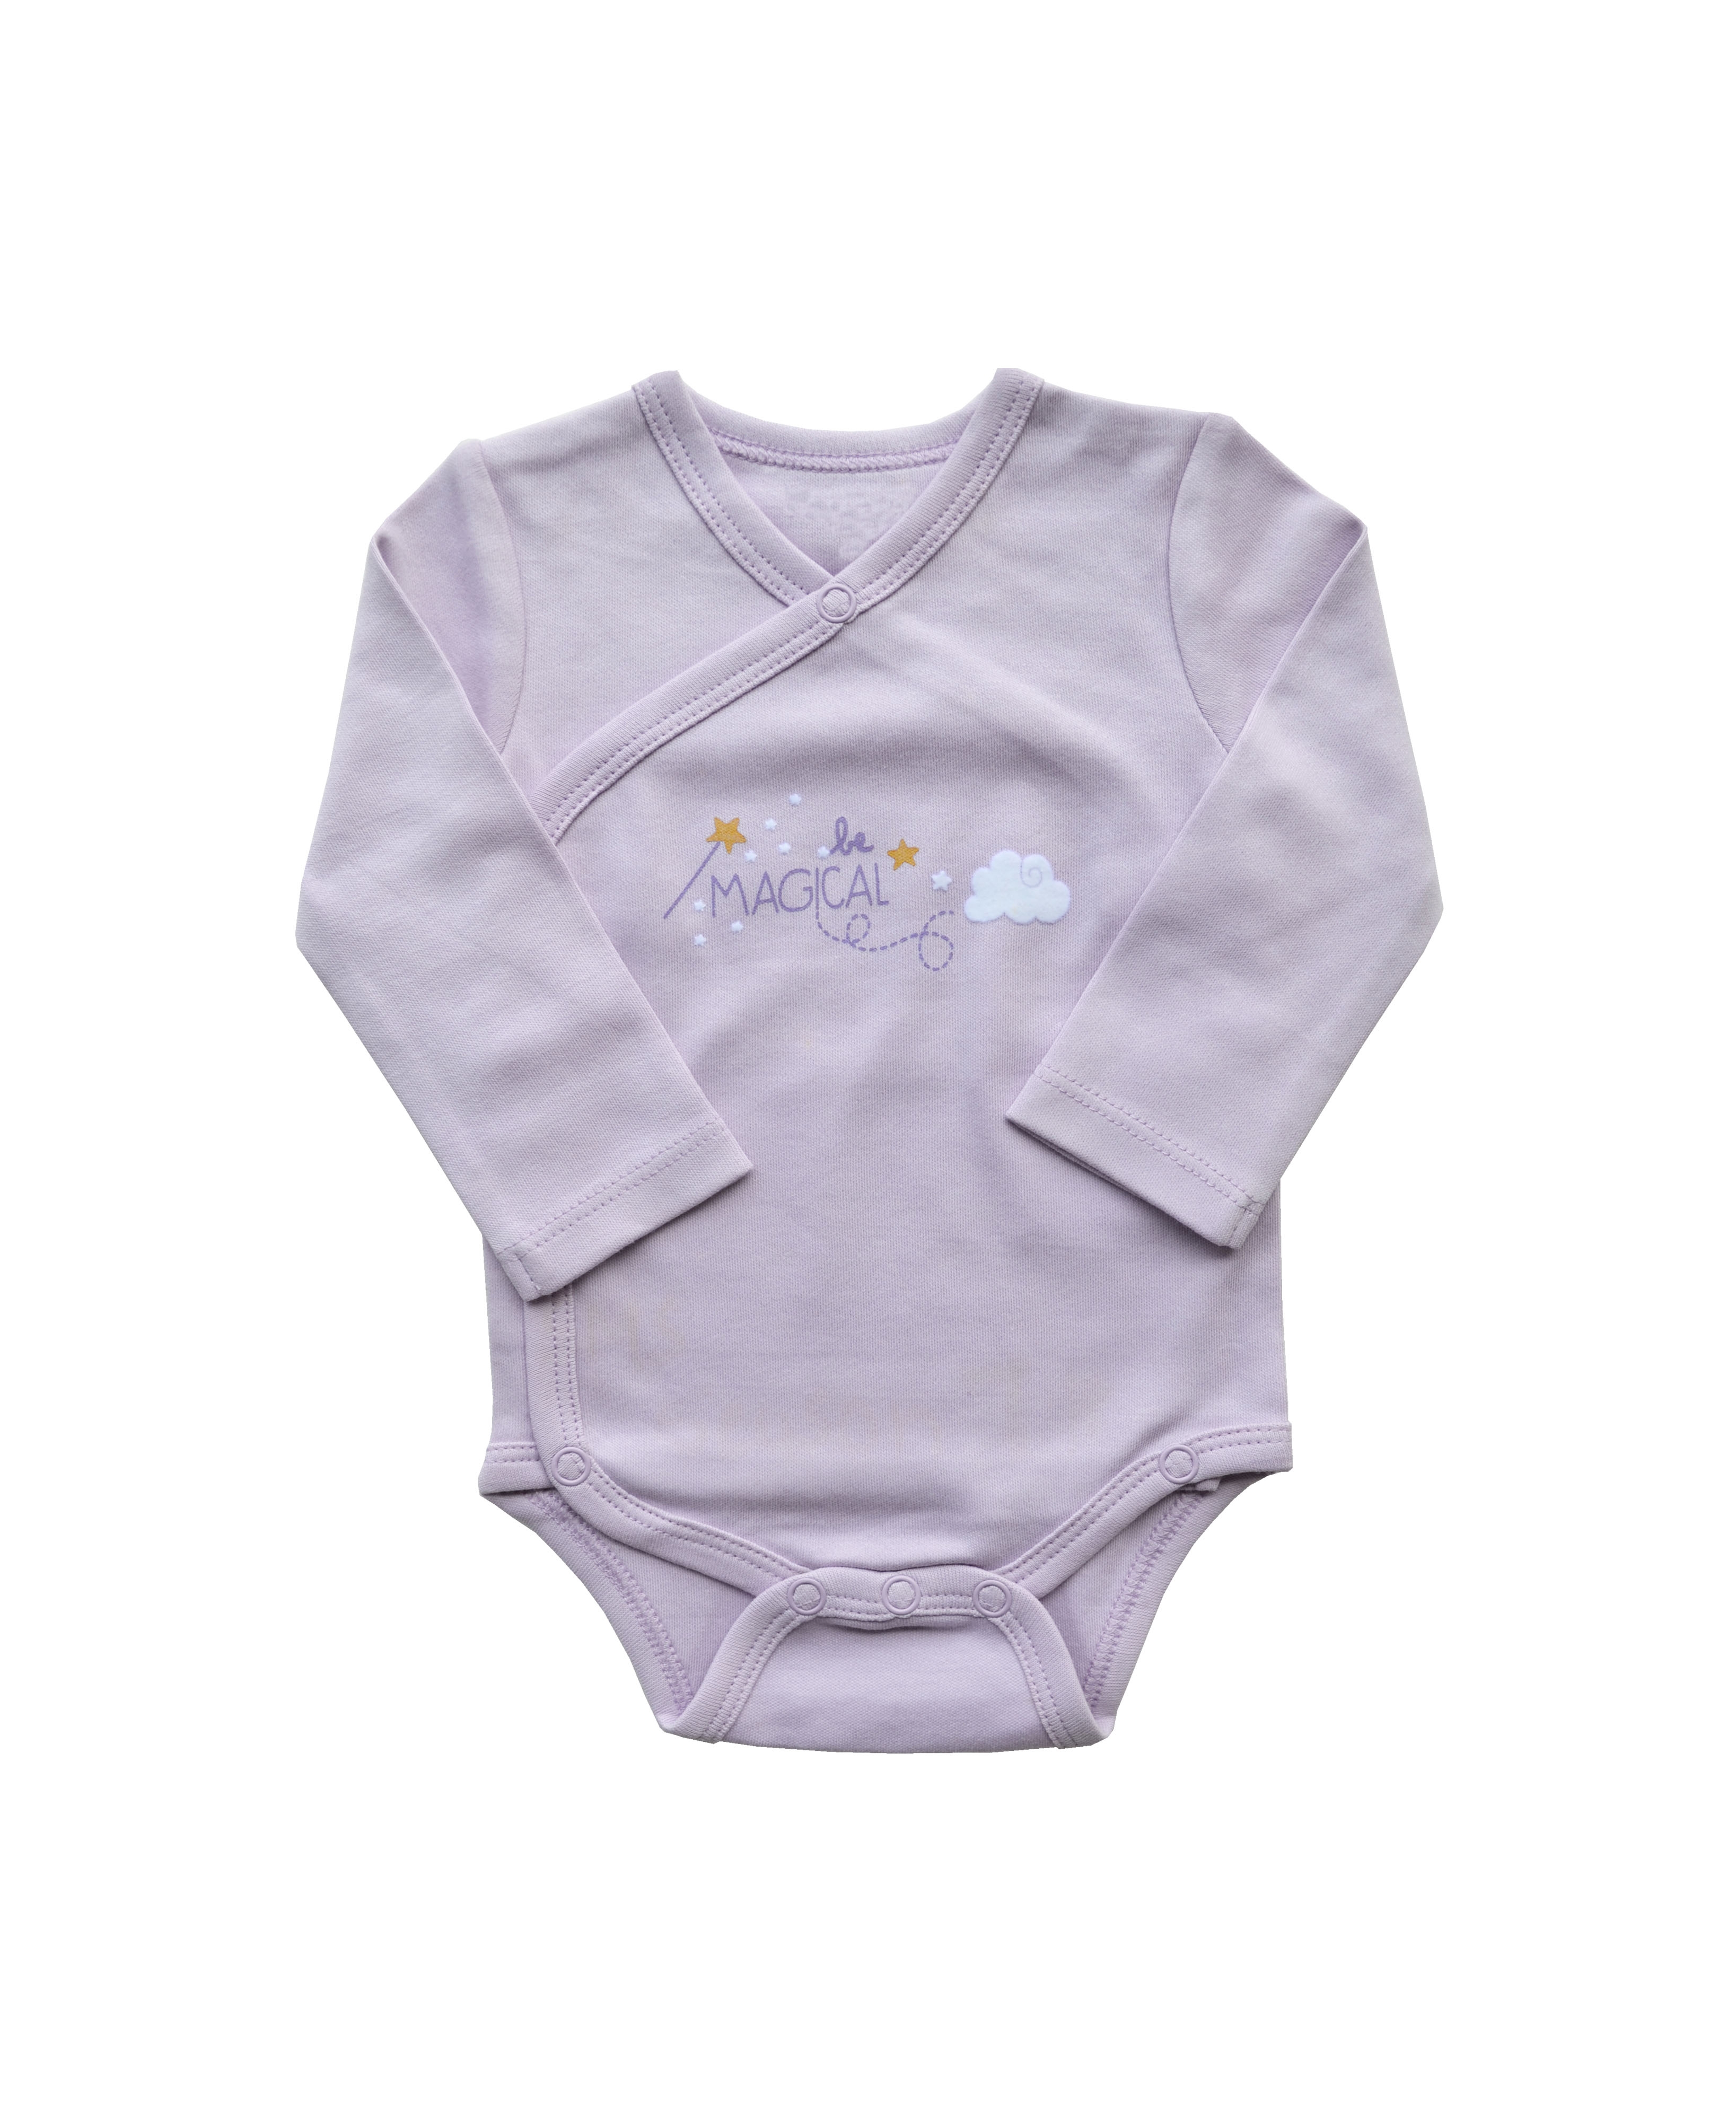 Purple Long Sleeve Romper/Onesie with Be Magical Print on Chest (100% Cotton Interlock)